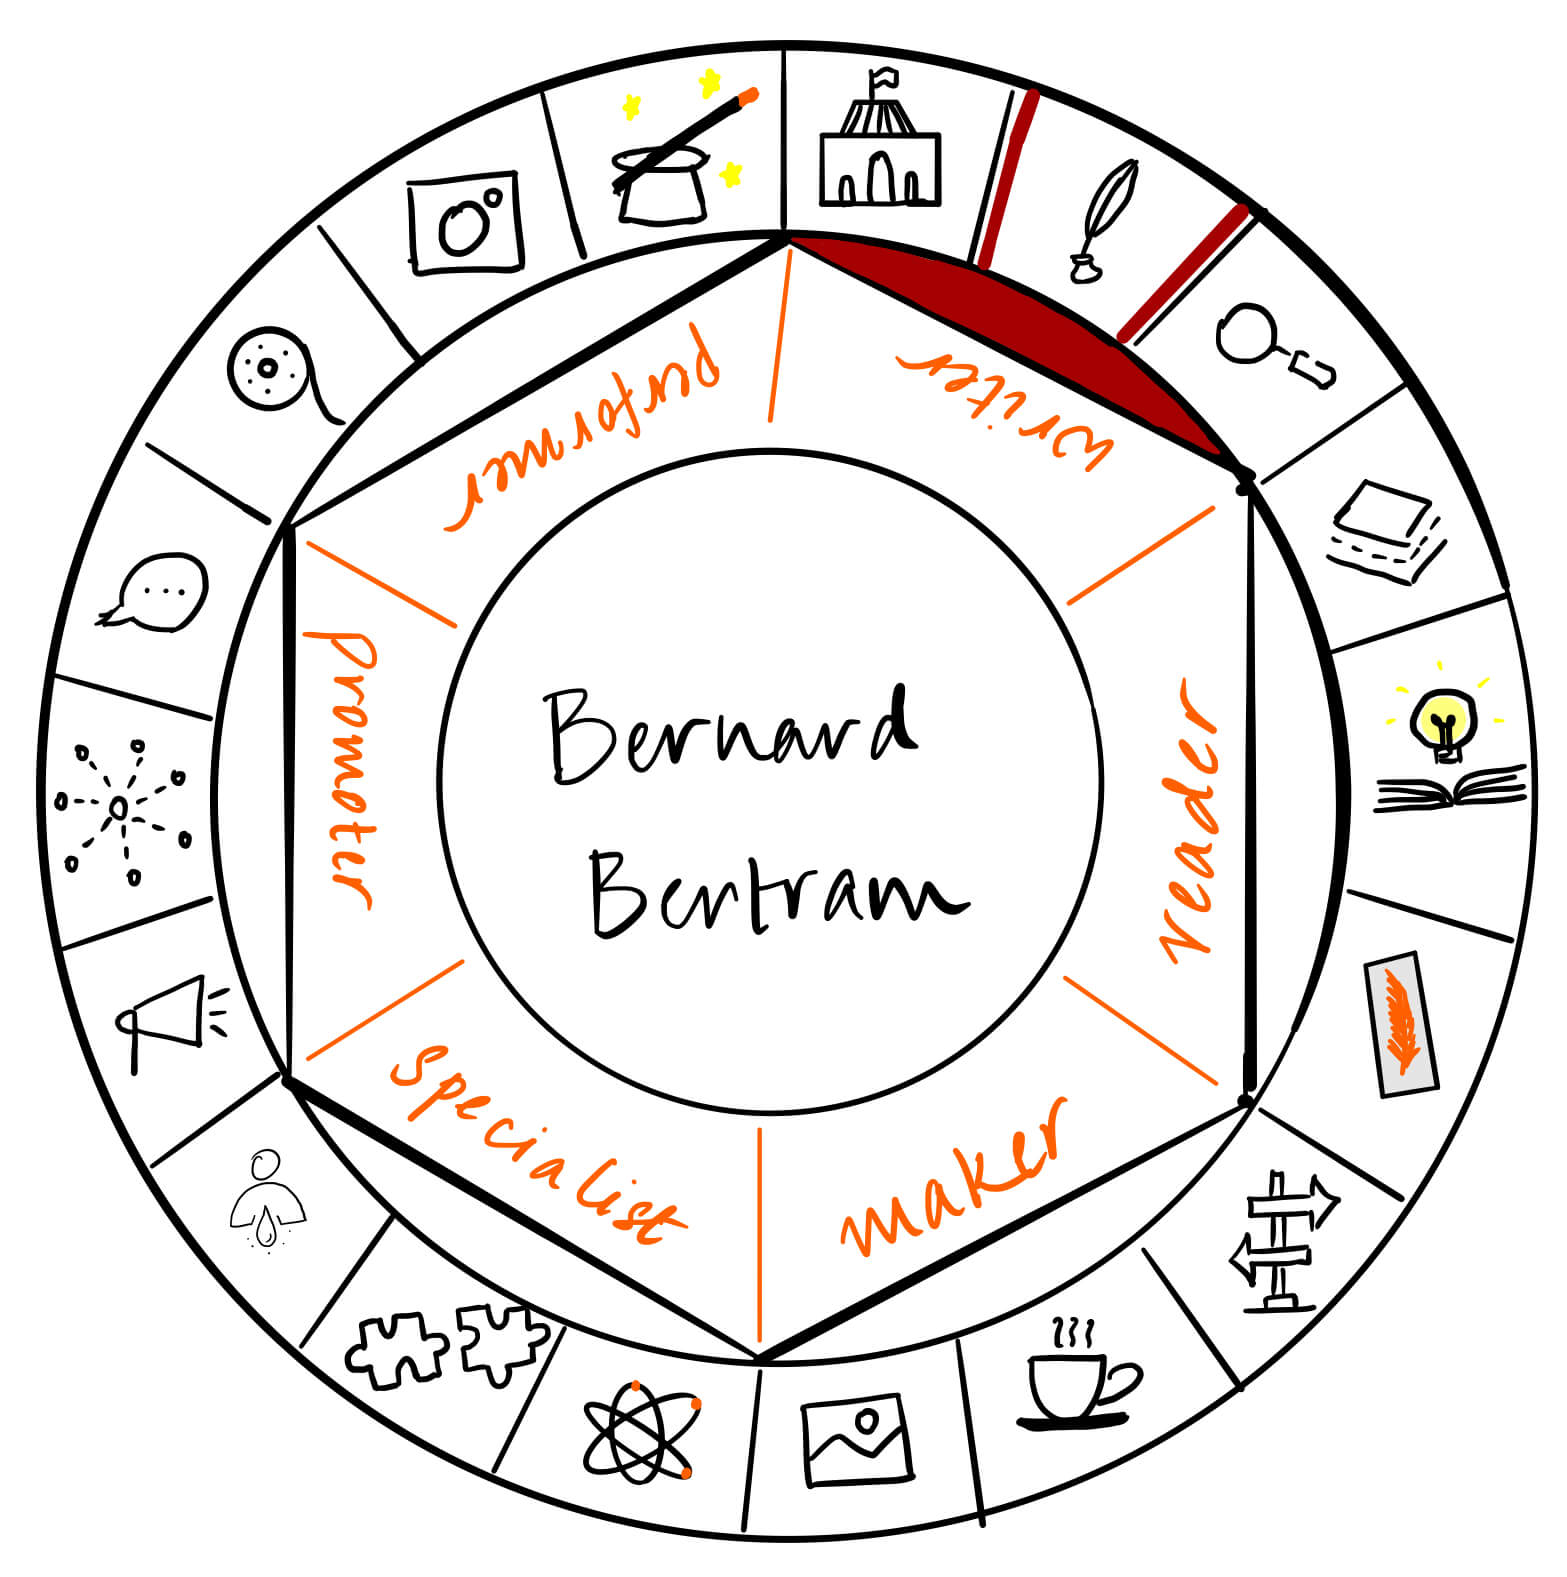 Bernard Bertram is a writer. It's a pleasure to have him over for a guest post on The Creator's Roulette to talk about writing under a pseudonym.